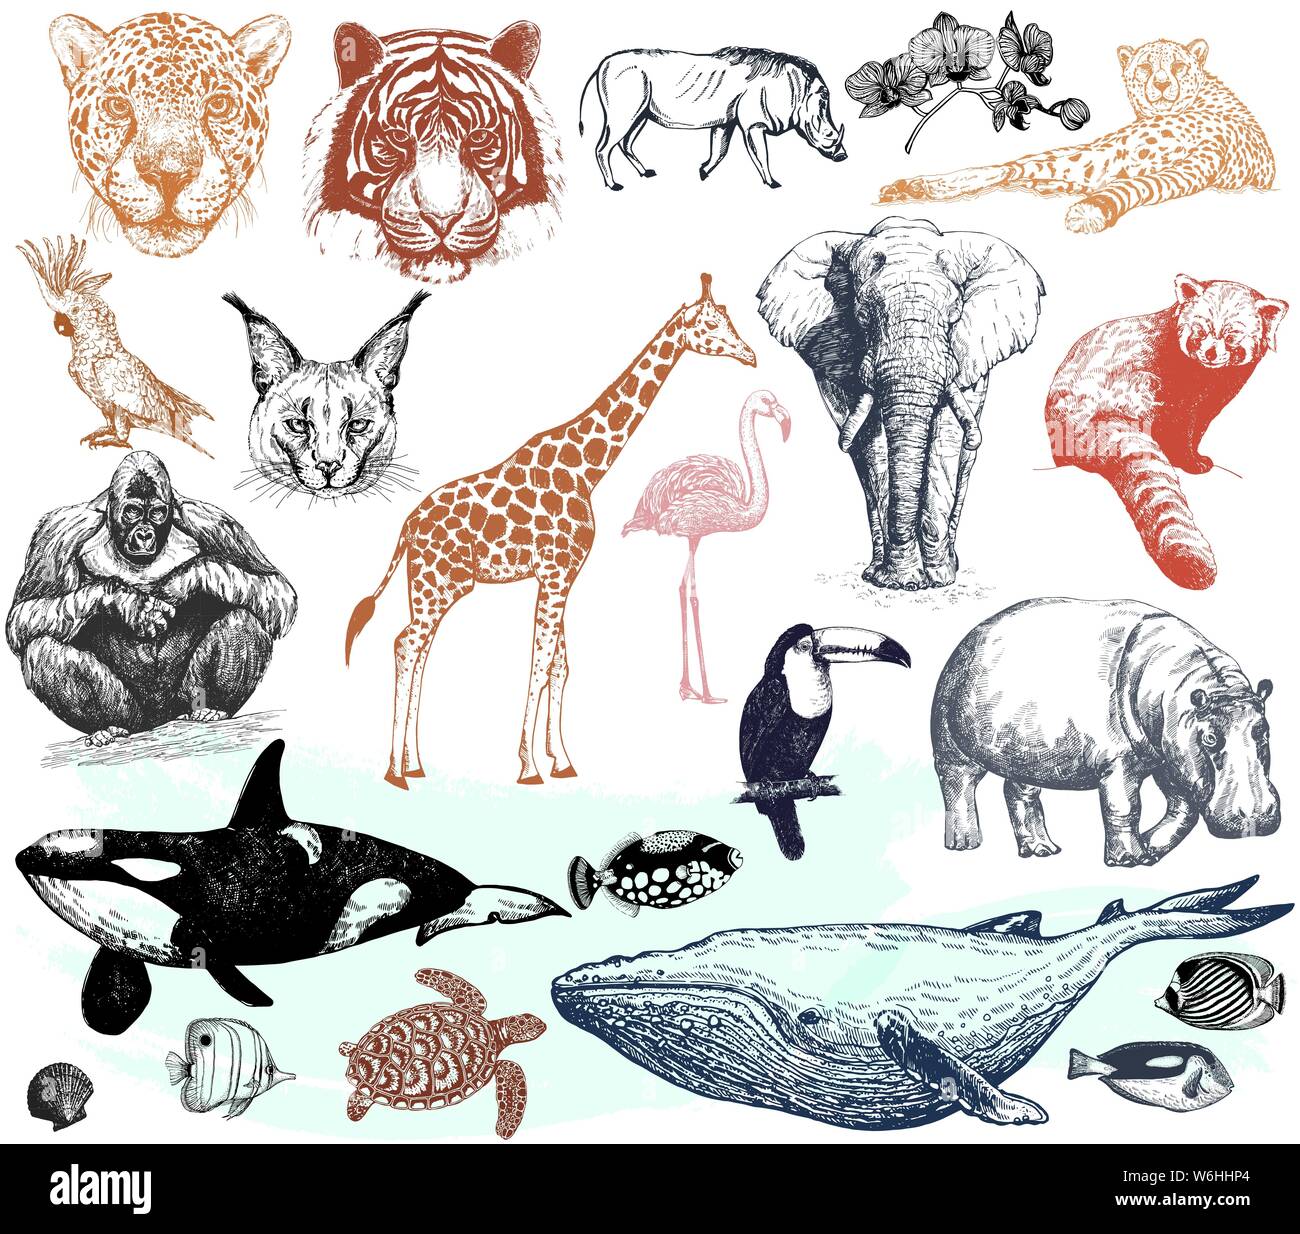 Big set of hand drawn sketch style wild animals isolated on white background. Vector illustration. Stock Vector